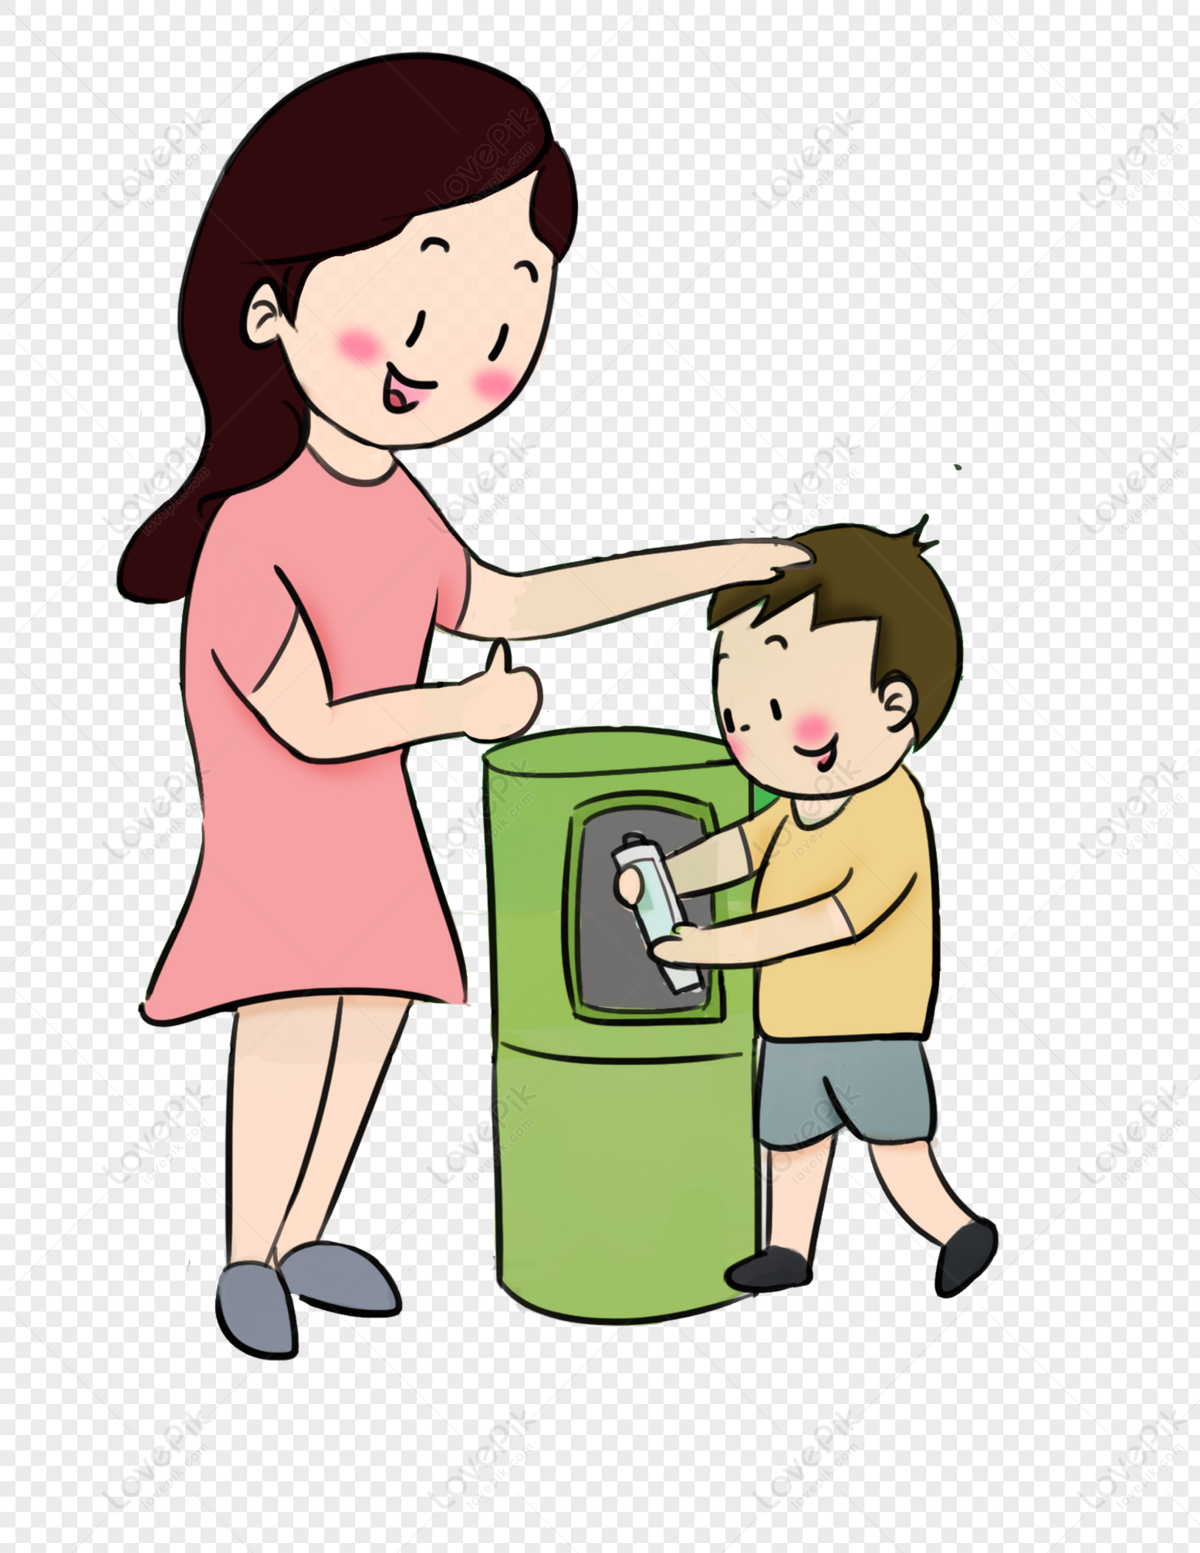 Children Throw Rubbish PNG Image Free Download And Clipart Image For Free  Download - Lovepik | 400256561